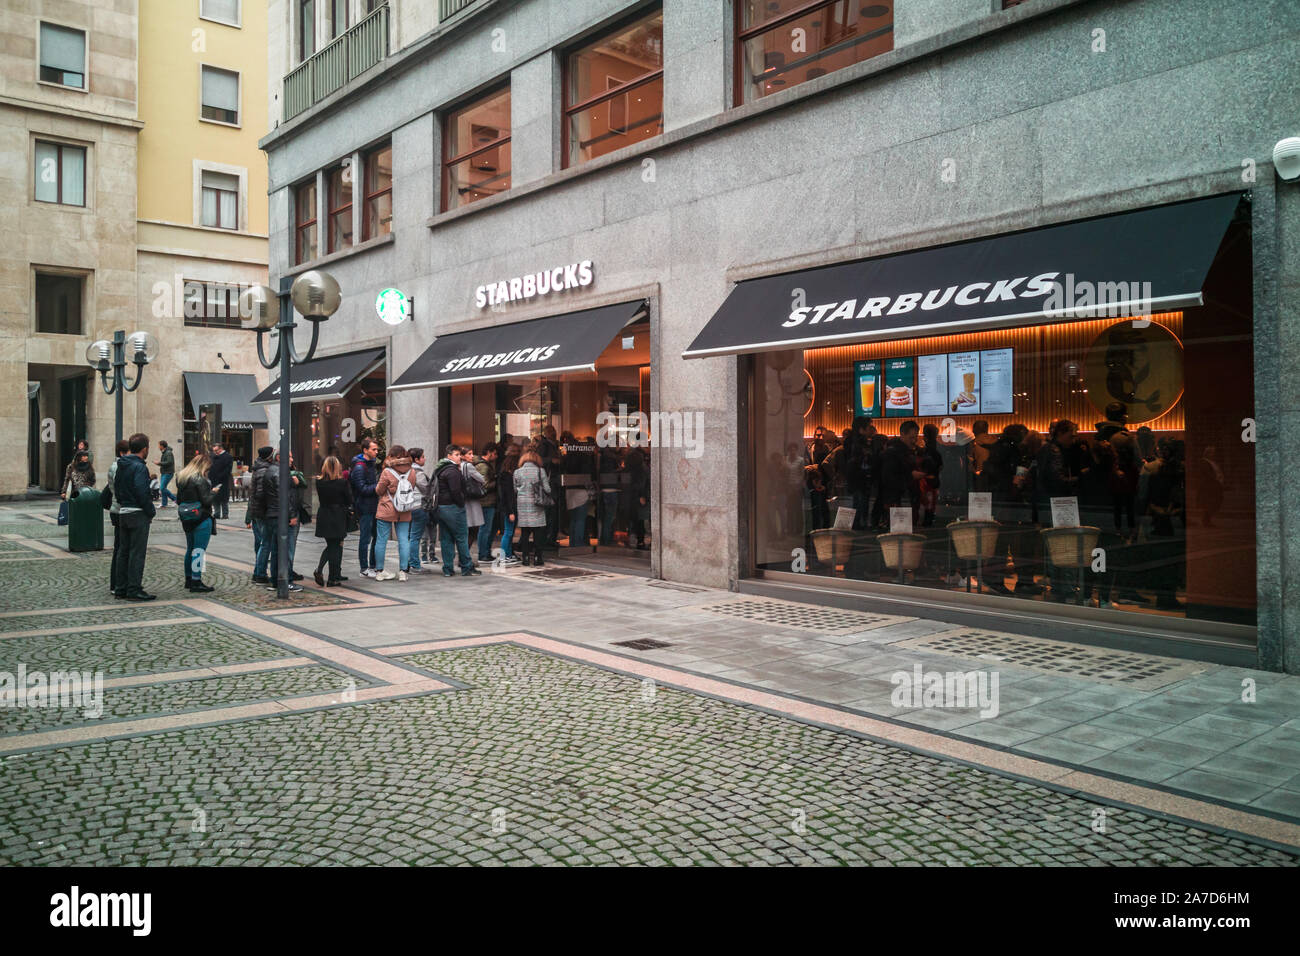 Queue of people entering in the newly open Starbucks Coffee in Turin. Turin, Piedmont, Italy, November 2019 Stock Photo